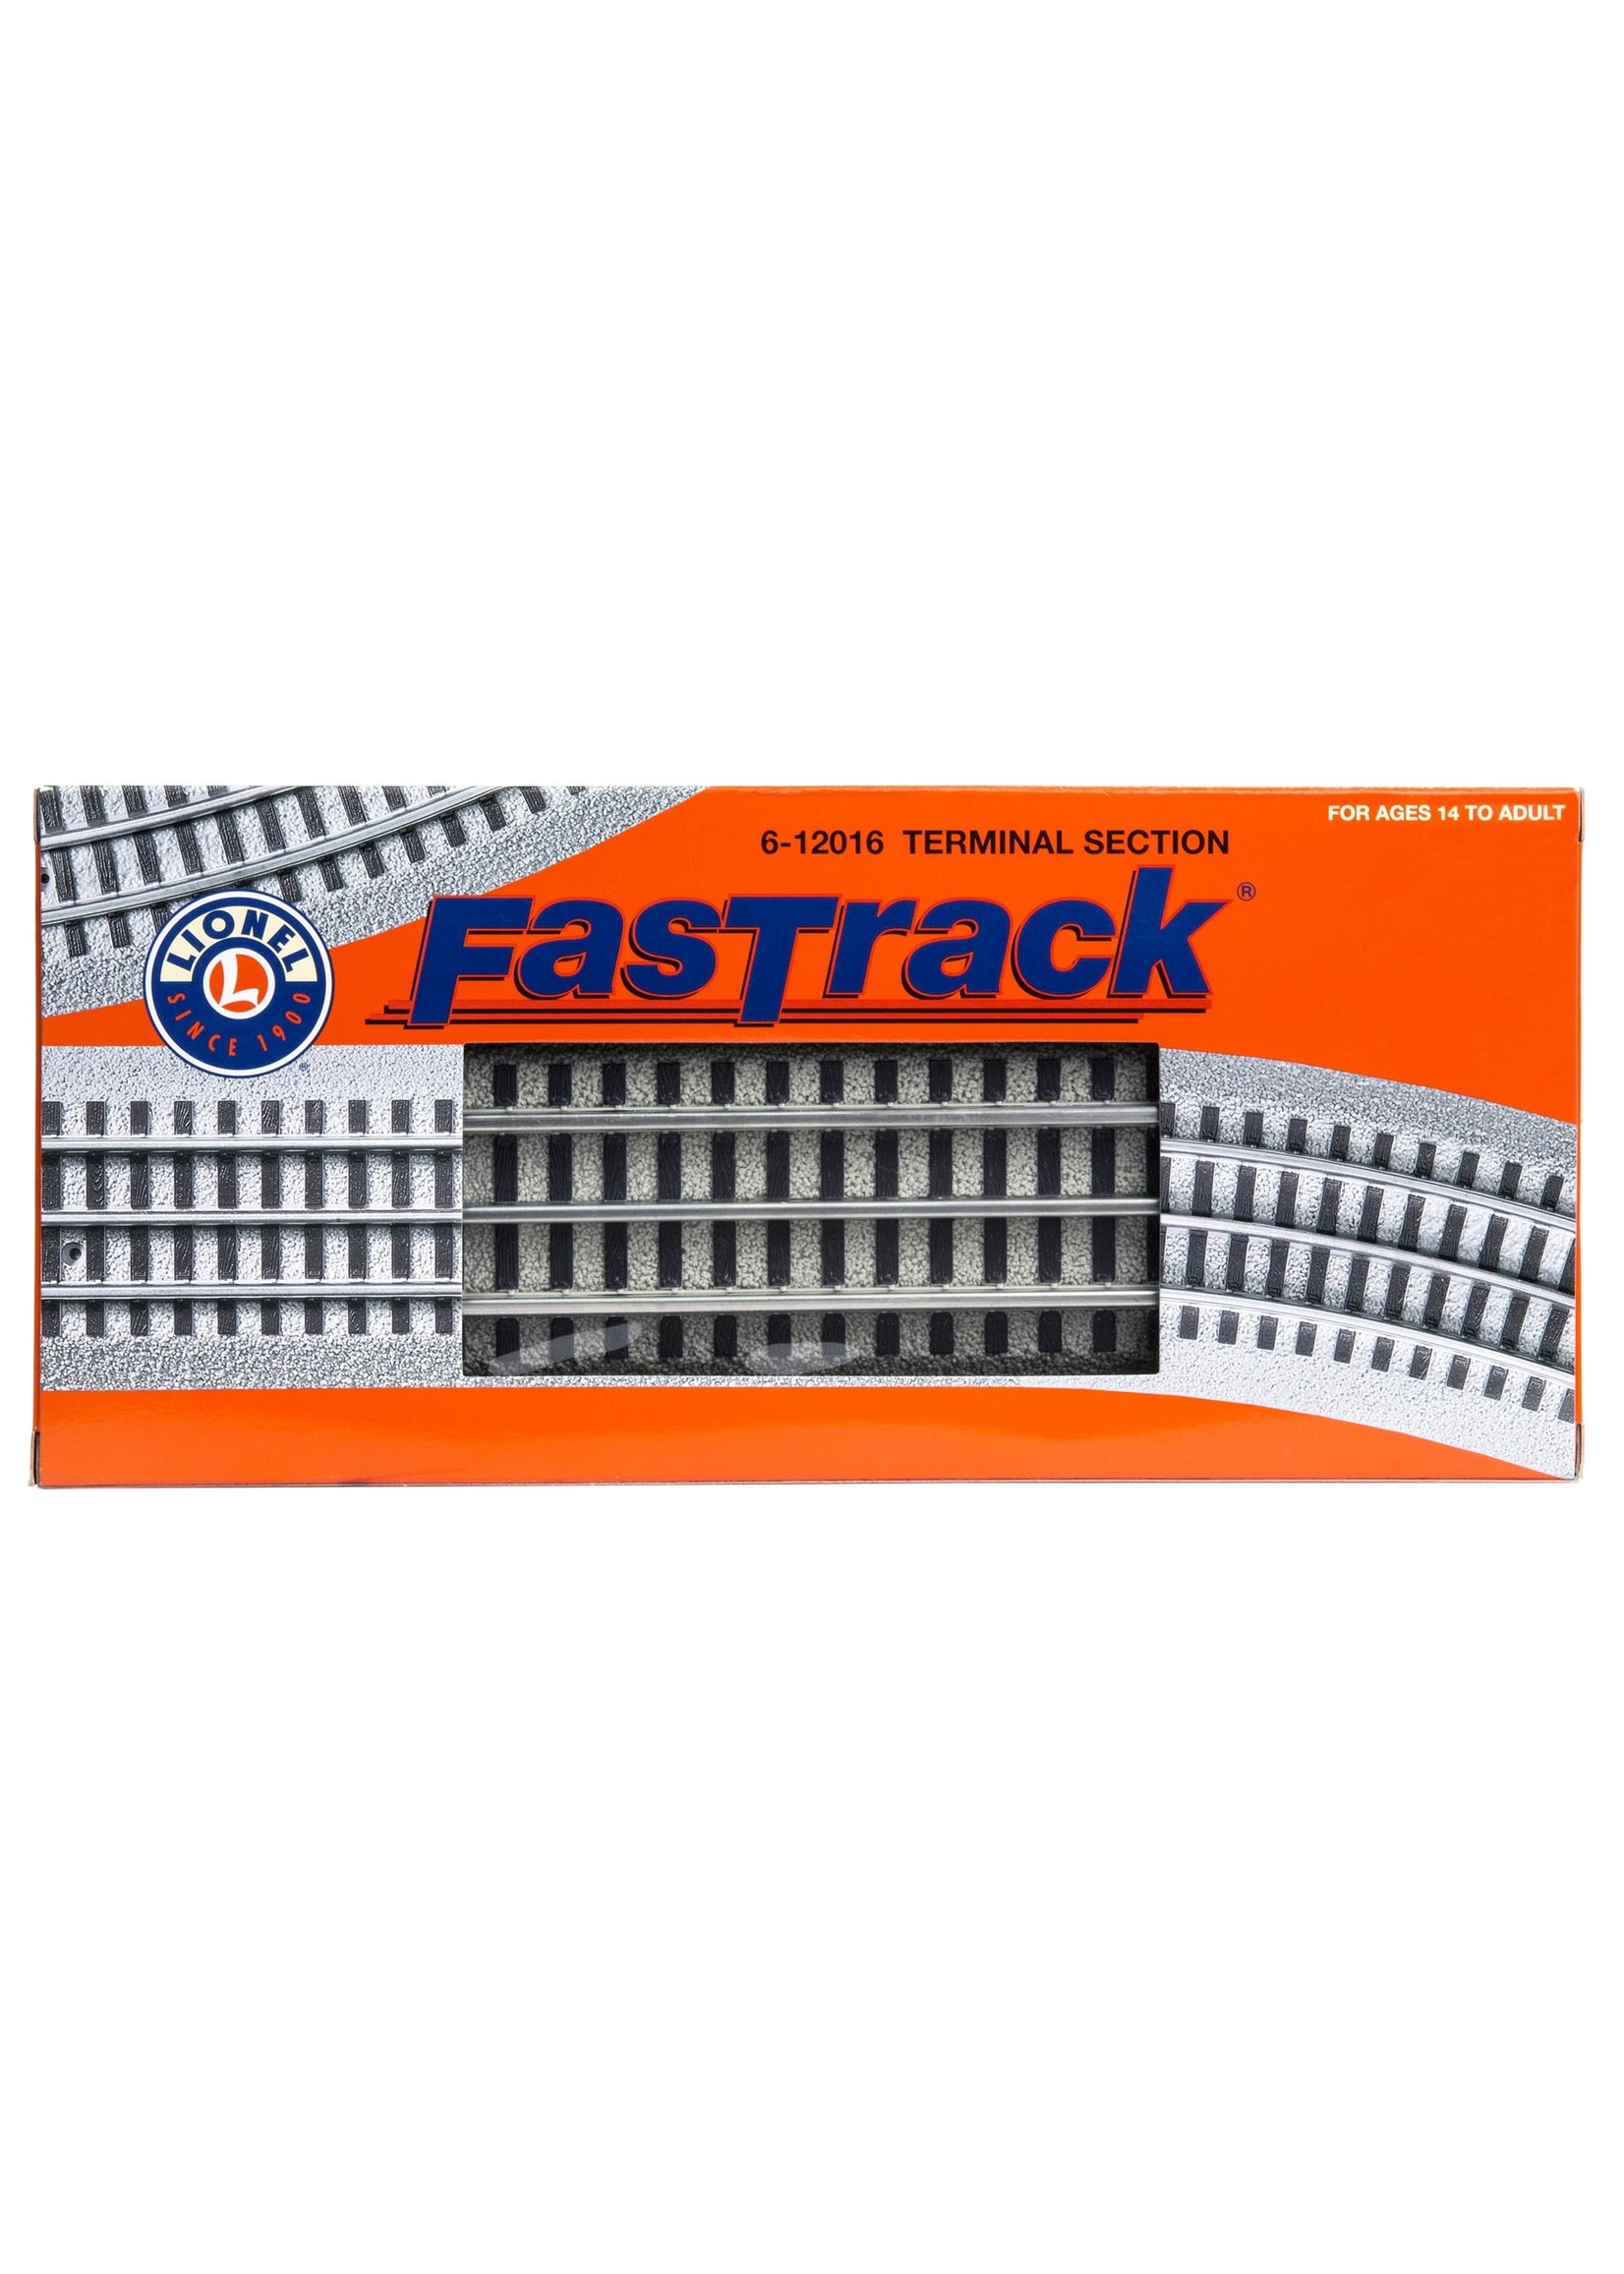 Lionel FasTrack Terminal Section